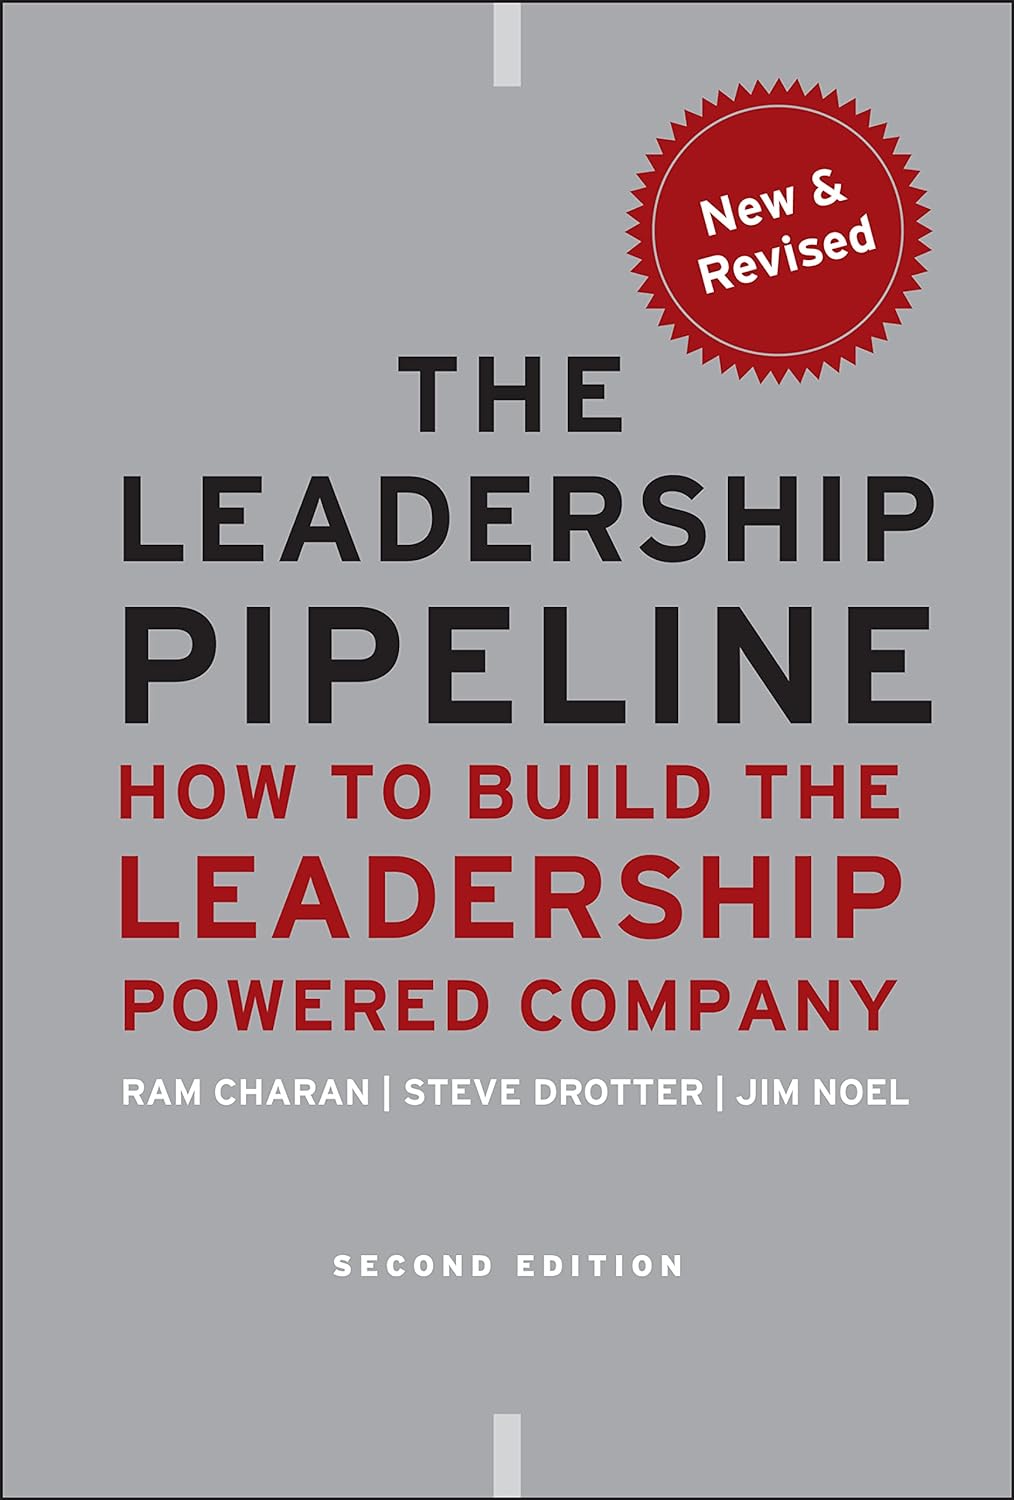 The Leadership Pipeline by Ram Charan (Author), Stephen Drotter (Author), James Noel (Author)  PAPERBACK